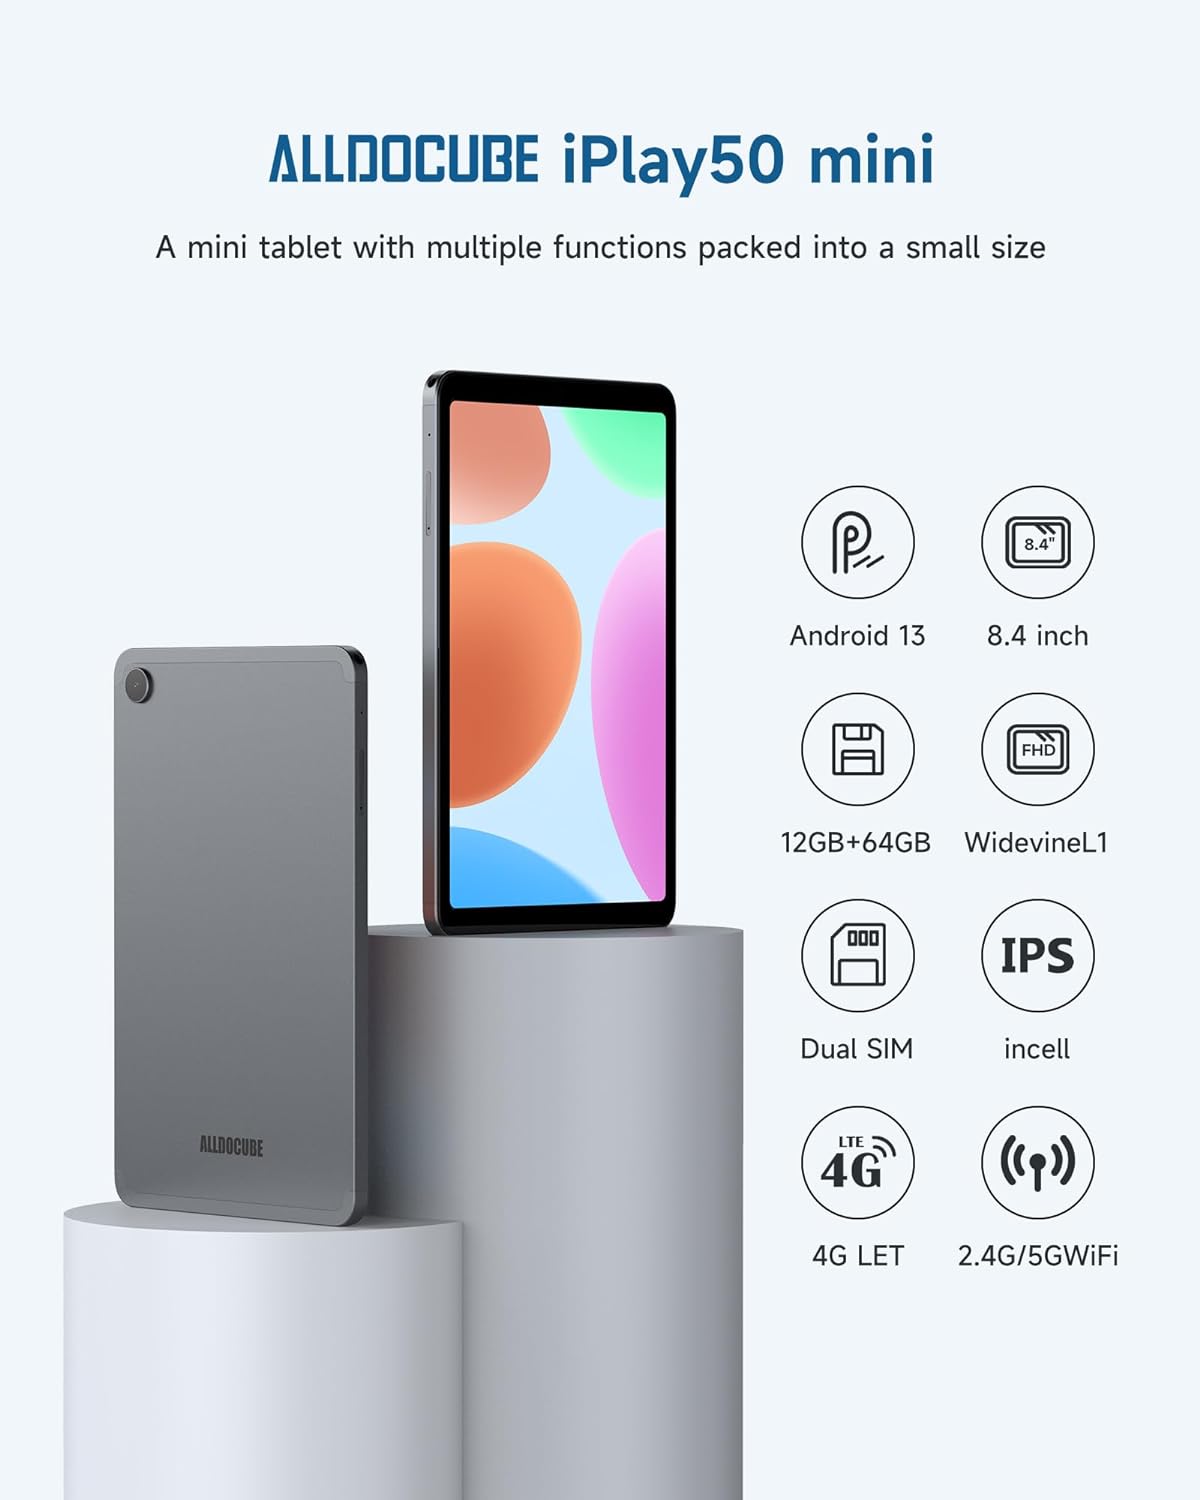 ALLDOCUBE Tablet iPlay 50 Mini Android 13, Tablet 8.4 Inch FHD 1920 x 1200 Incell IPS, 12(4+8) GB RAM 64GB ROM/TF 512GB, Tablet PC Octa-Core 1.6GHz, 4G LTE 5GHz WiFi, Bluetooth 5.0, Google GMS/GPS